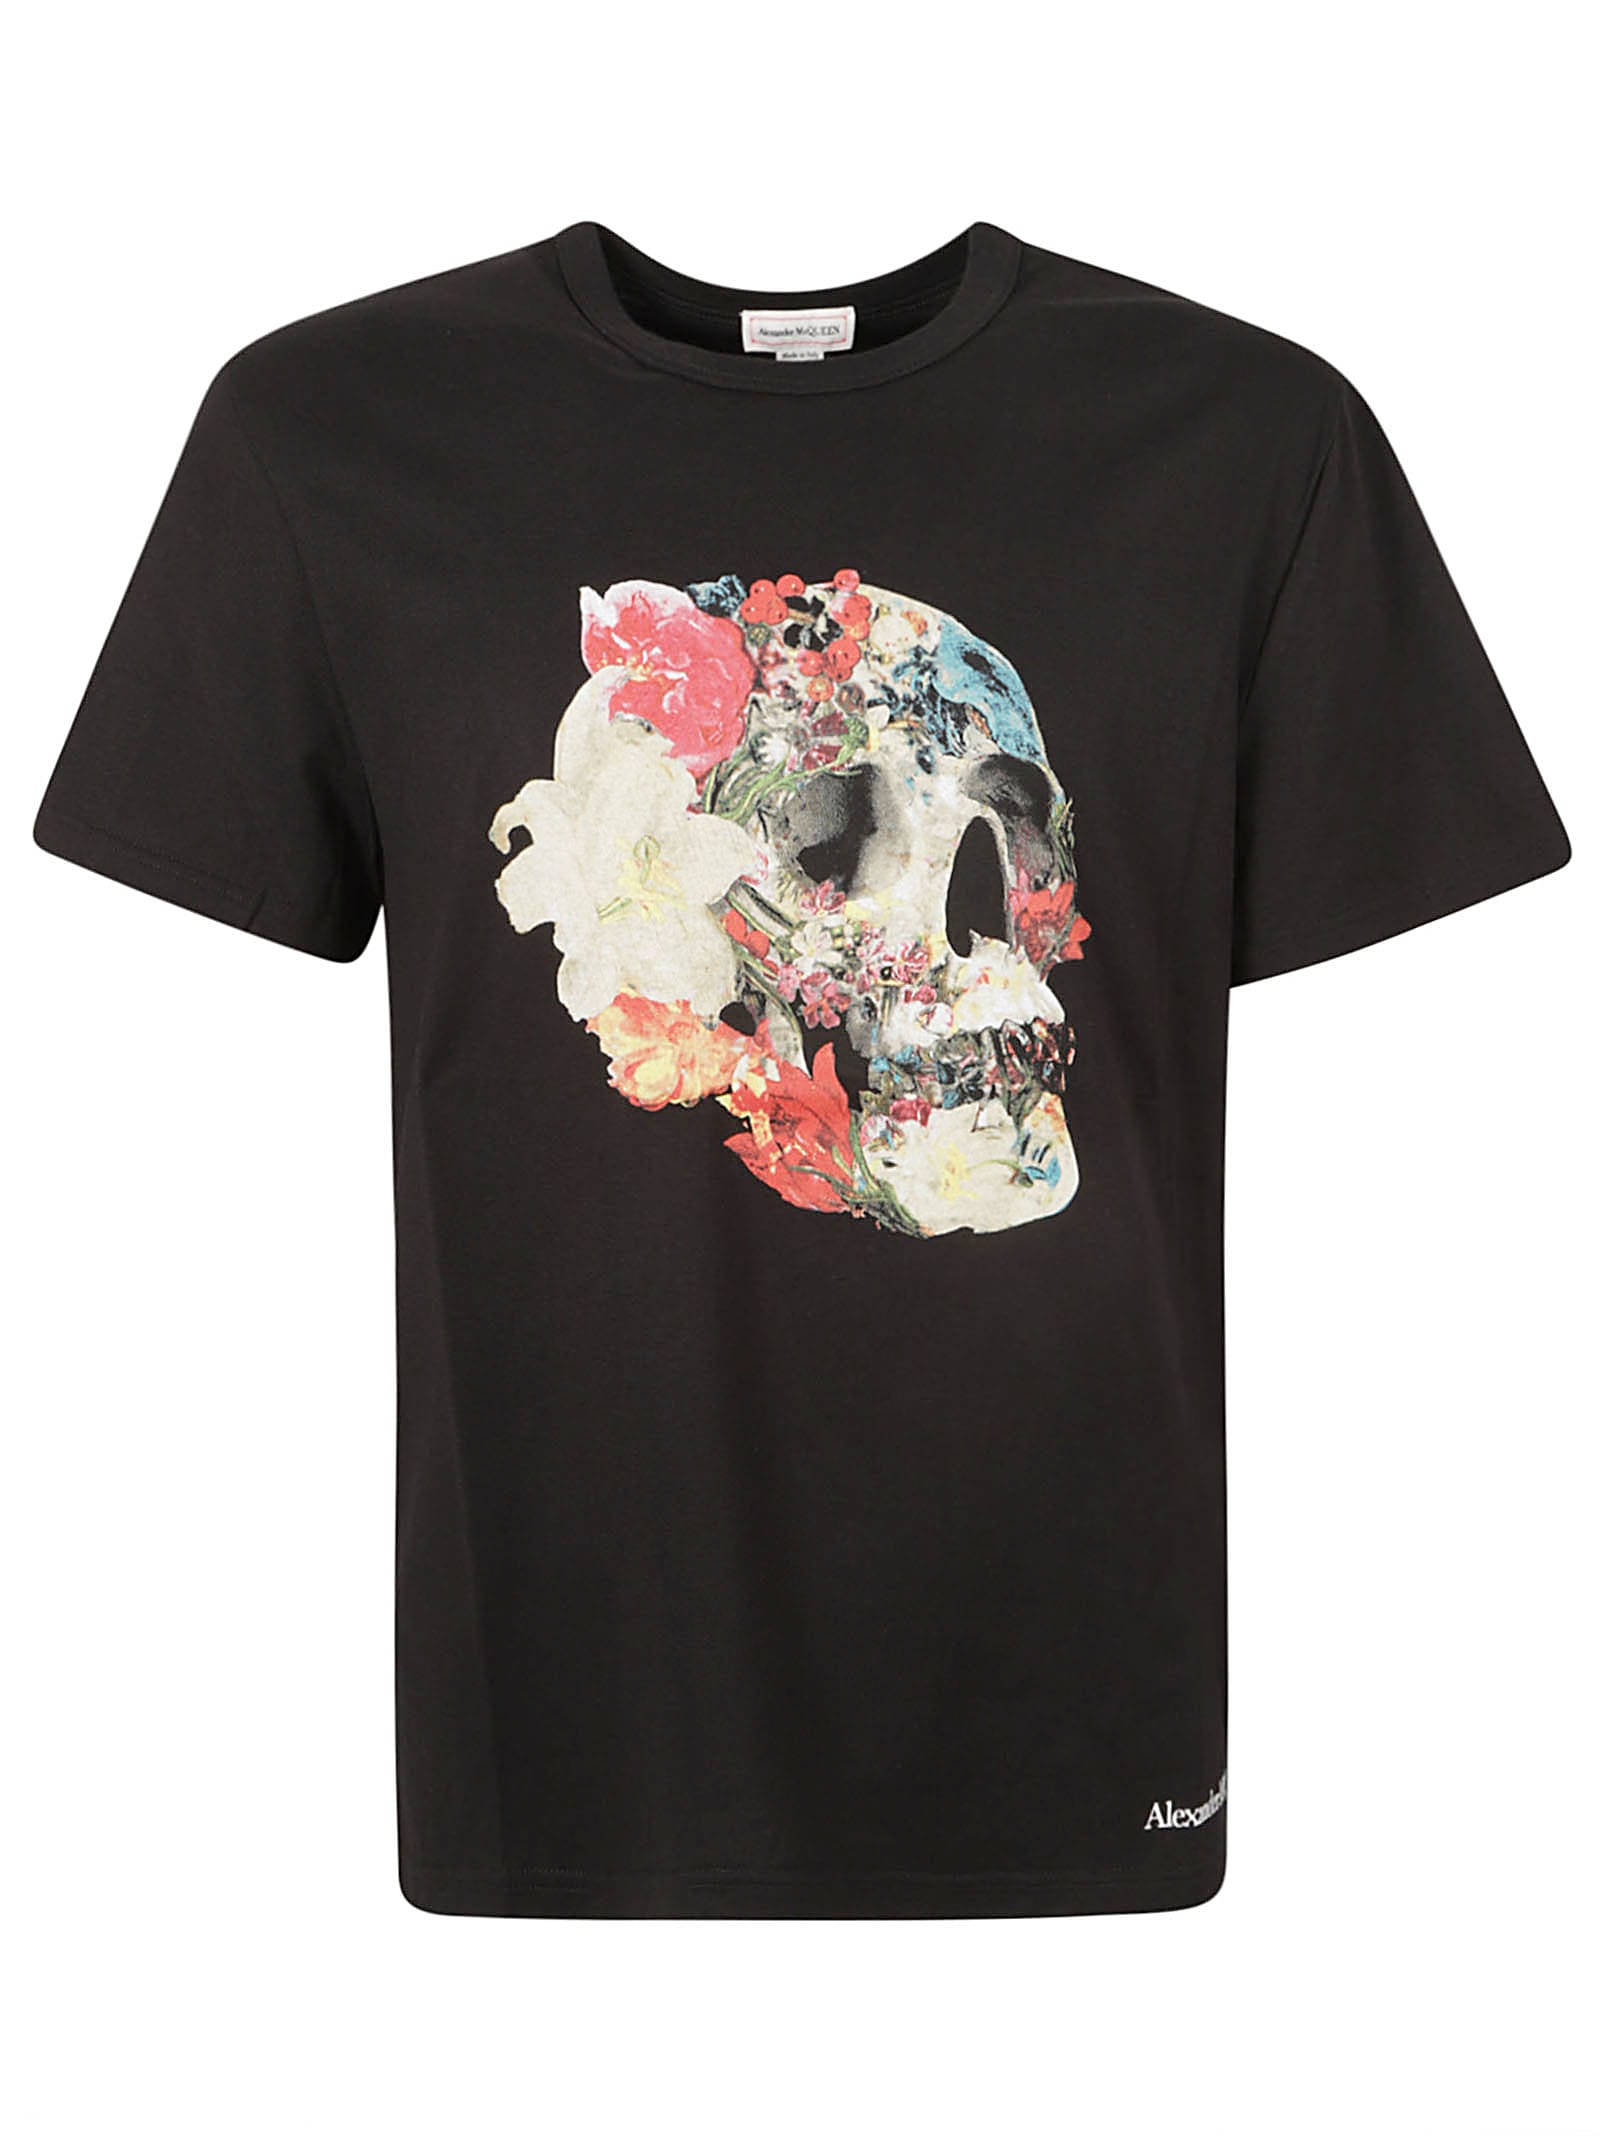 Alexander Mcqueen Mix Floral Skull Print T-shirt In Black/white/red